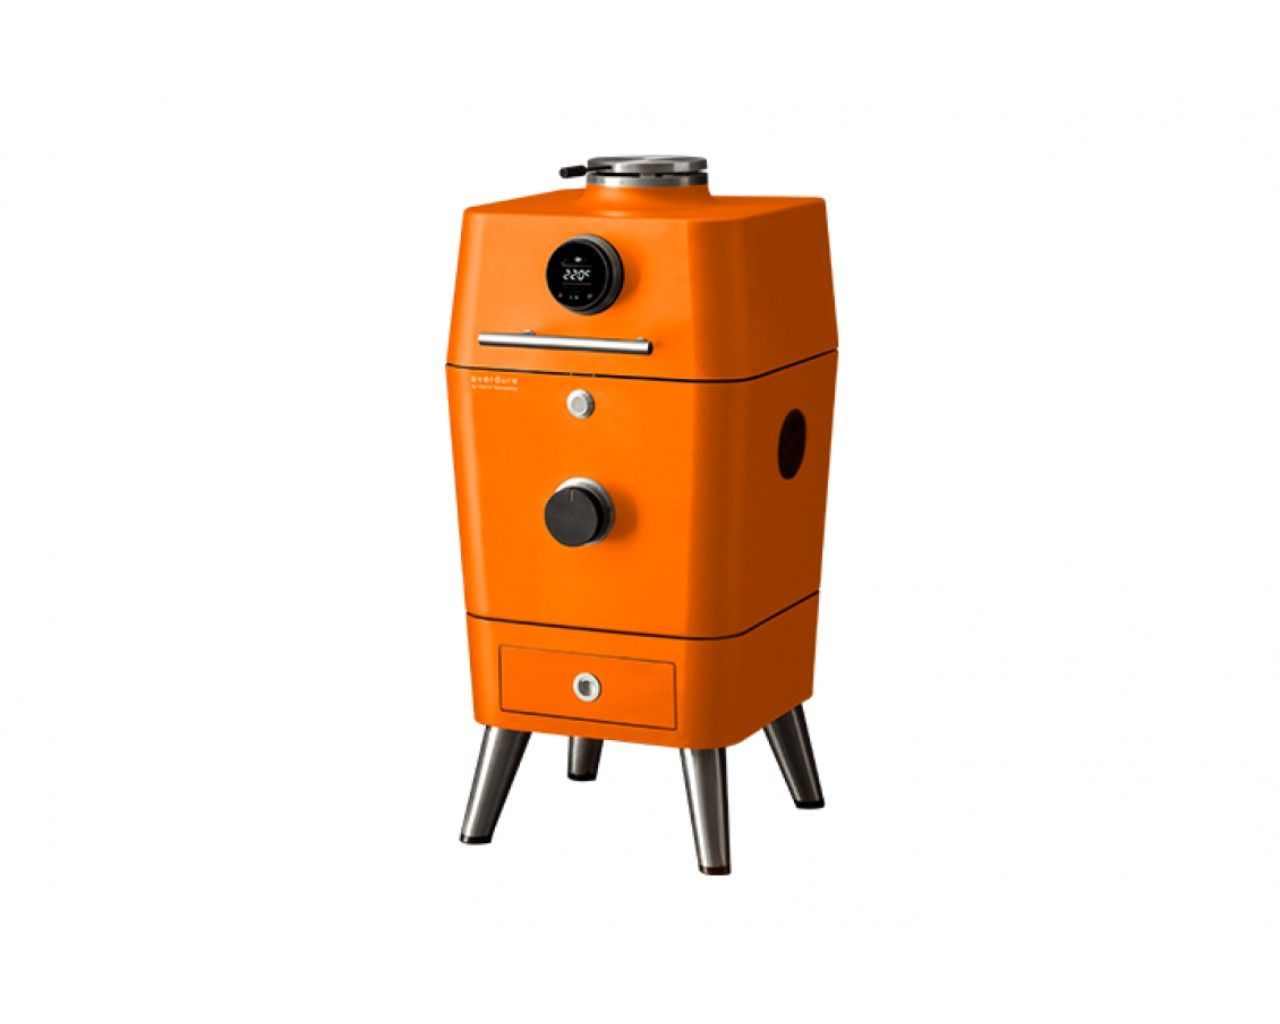 Everdure by Heston Blumenthal 4K Electric Ignition Charcoal Outdoor Oven, Orange, small-swatch